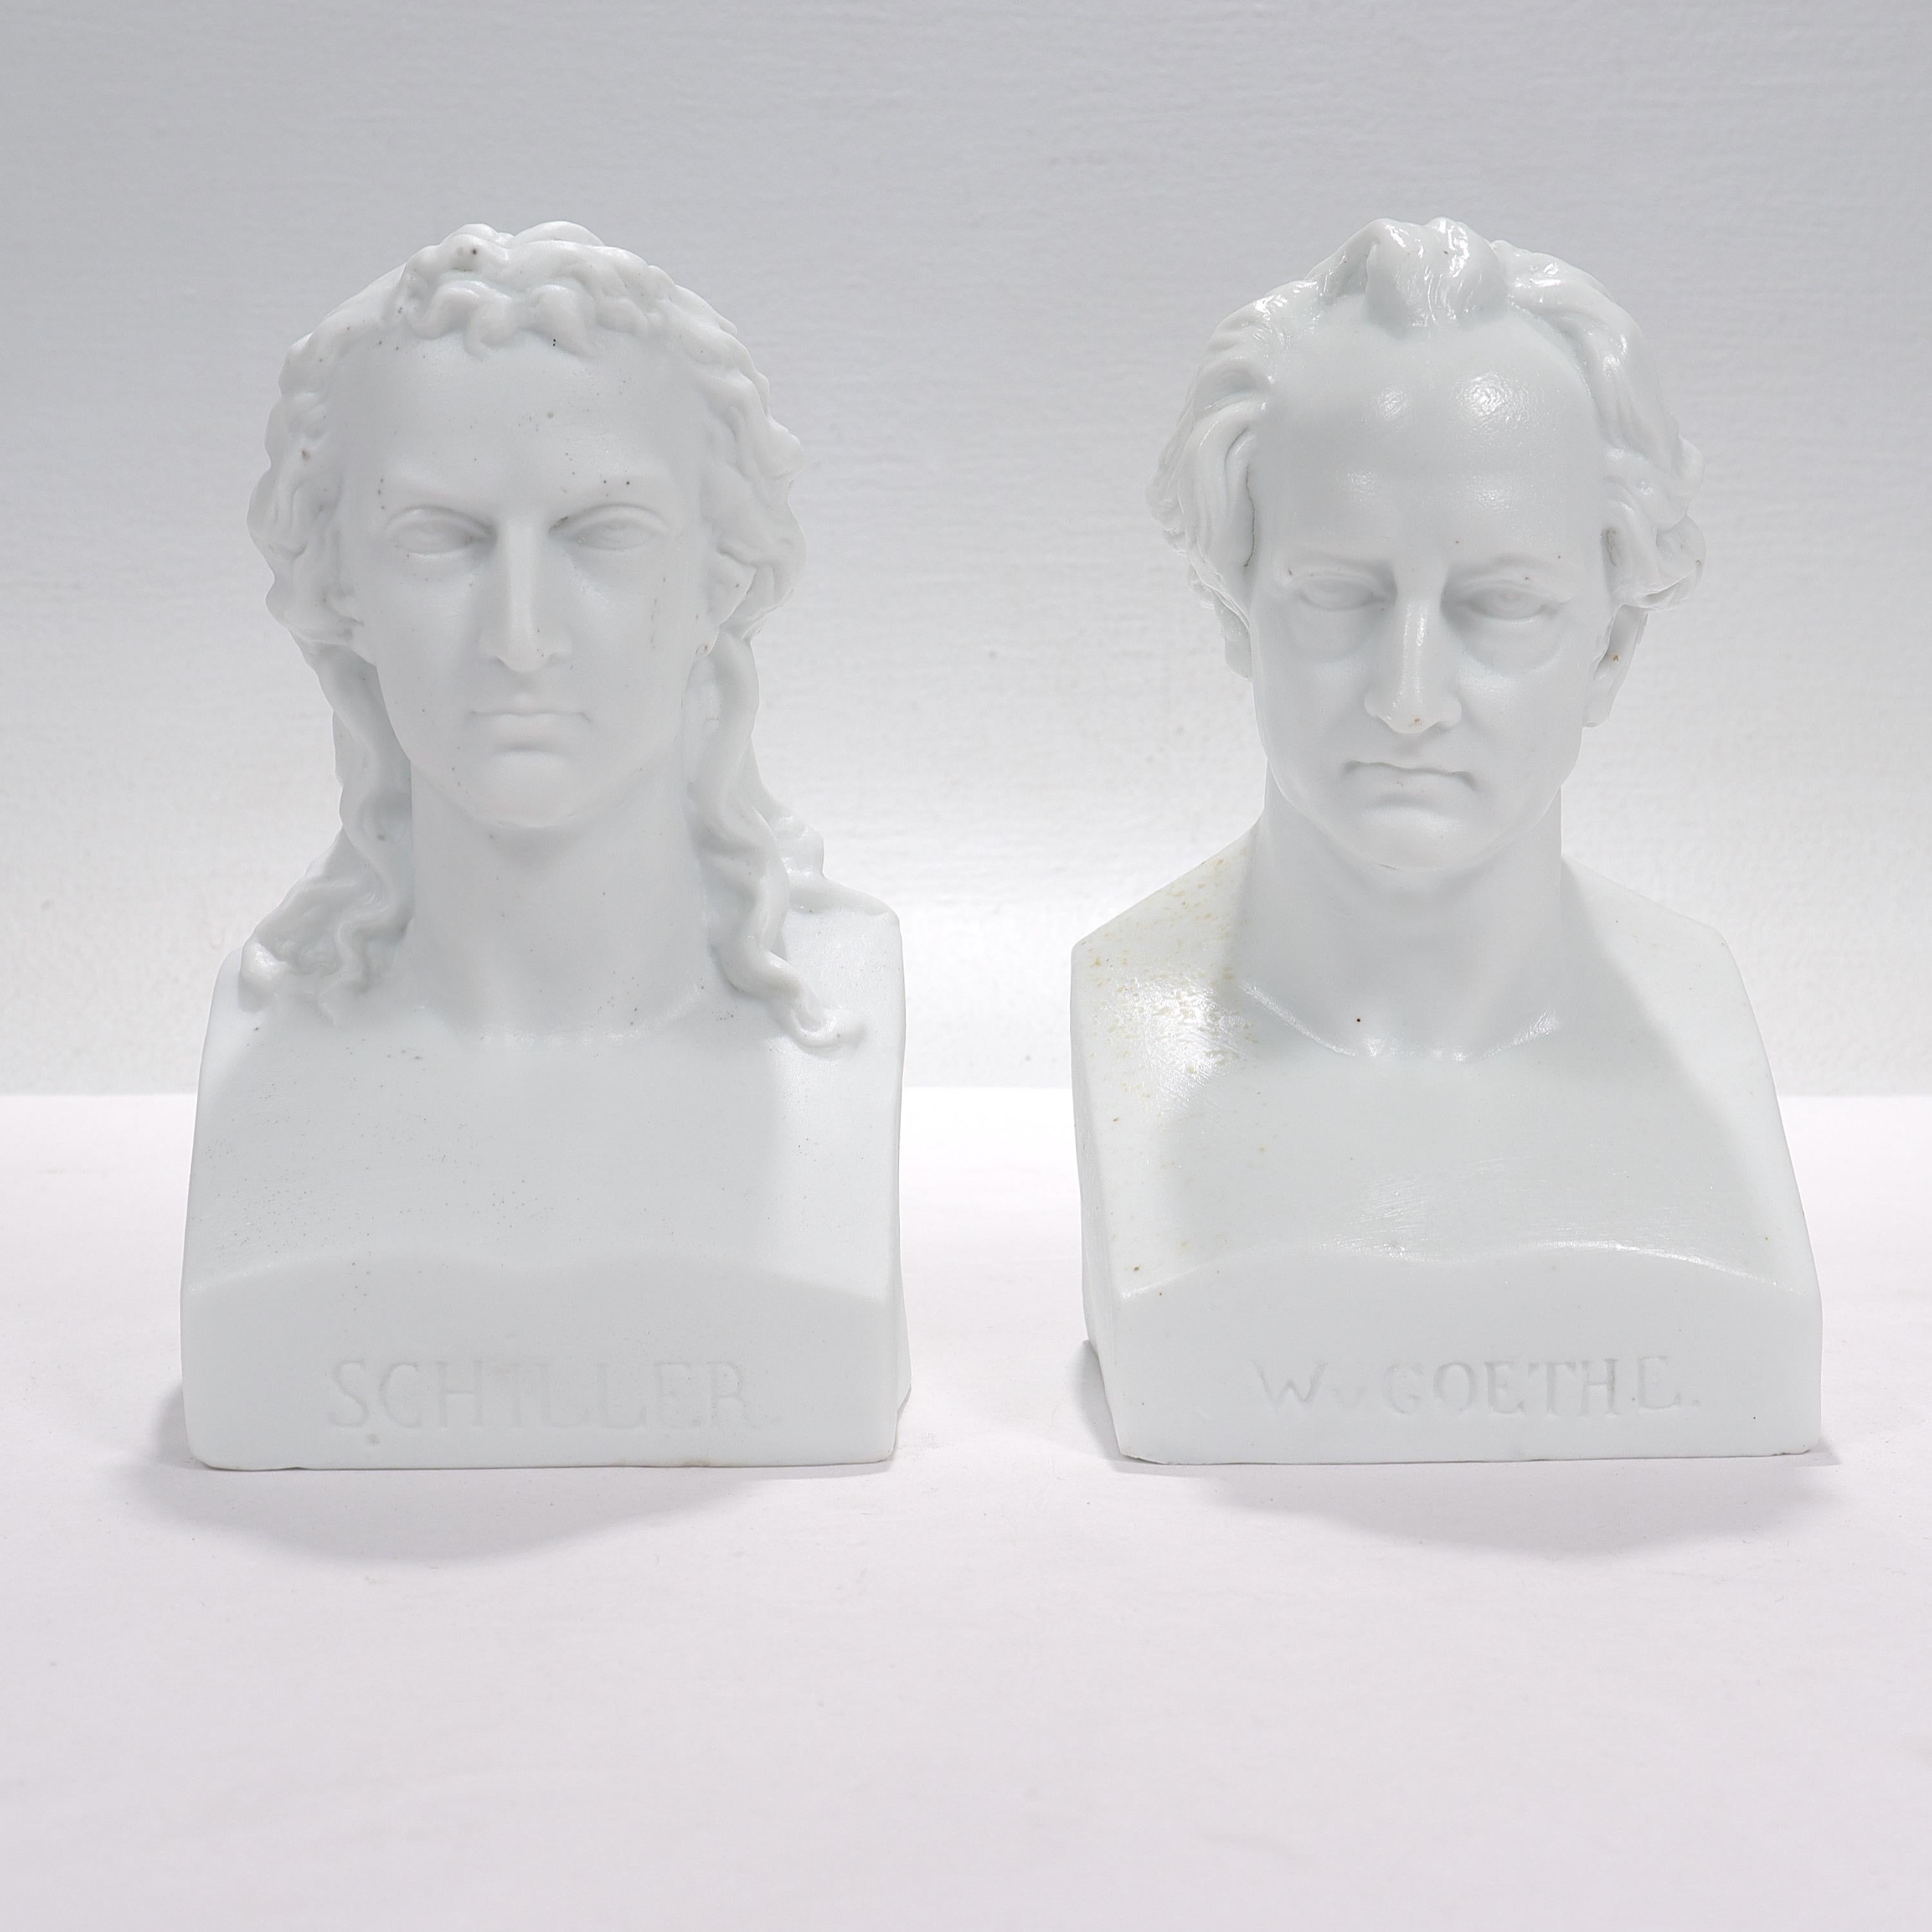 Unknown Antique Pair of Victorian Parian or Bisque Porcelain Busts of Schiller & Goethe  For Sale